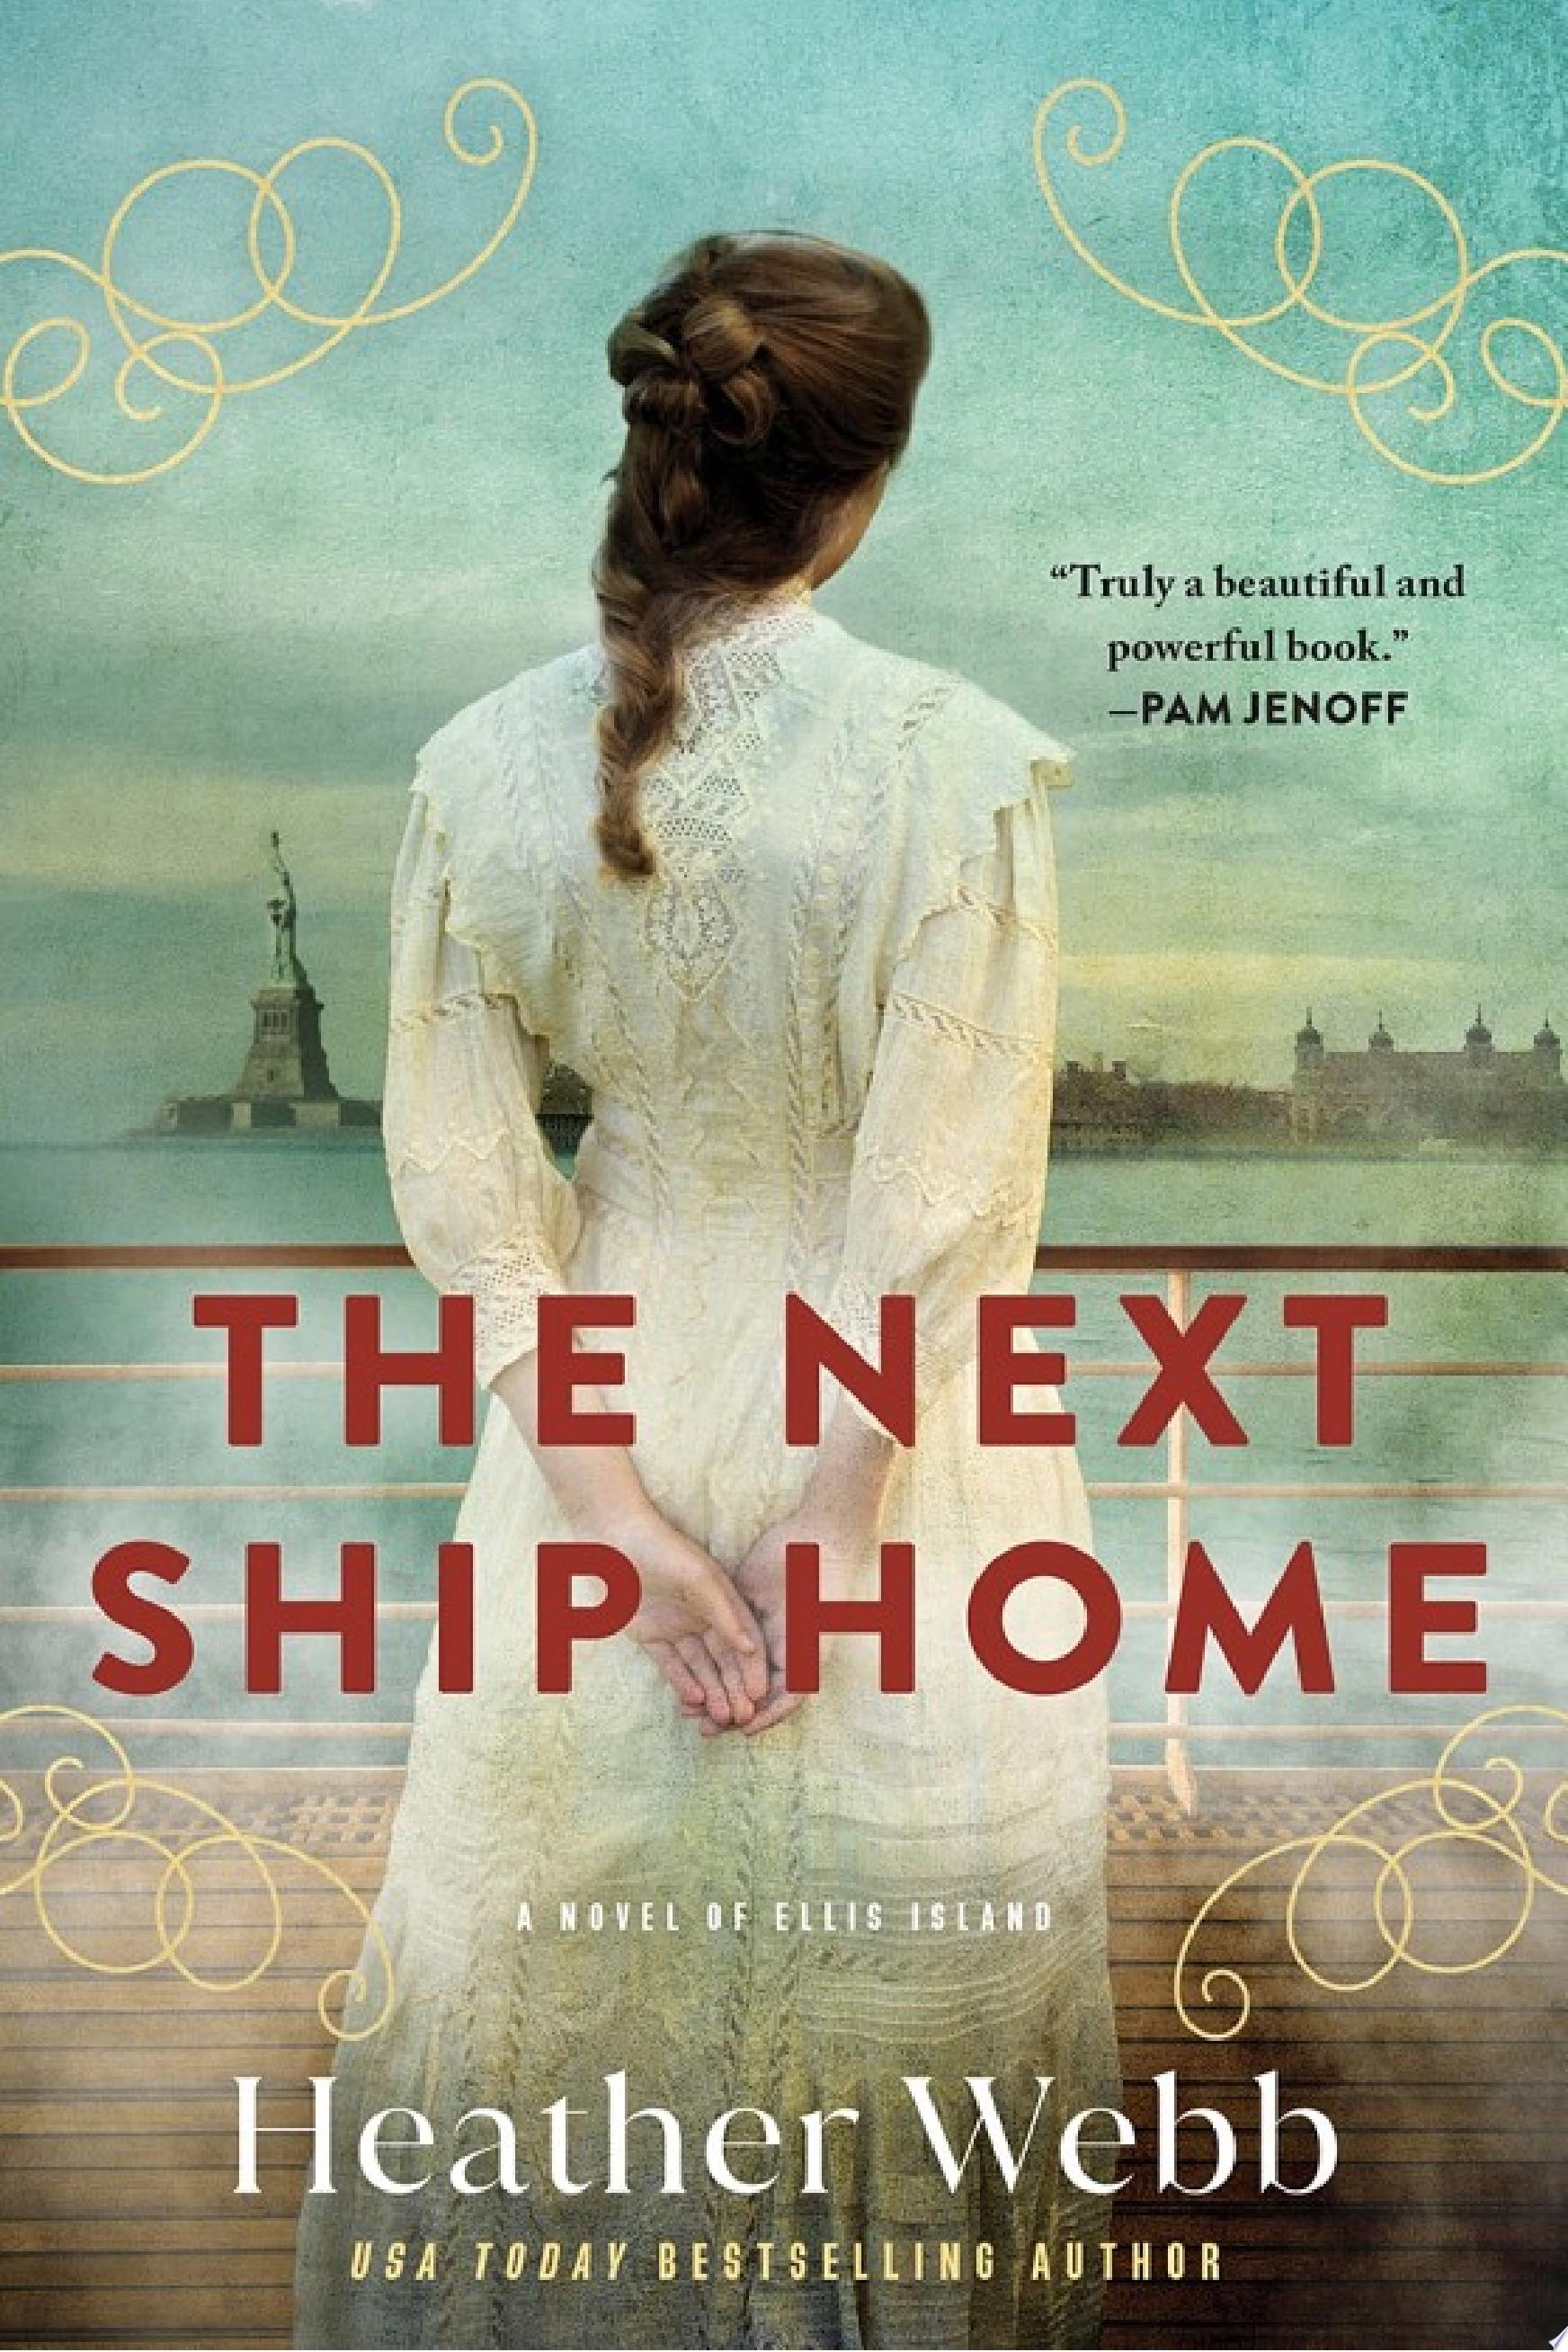 Image for "The Next Ship Home"